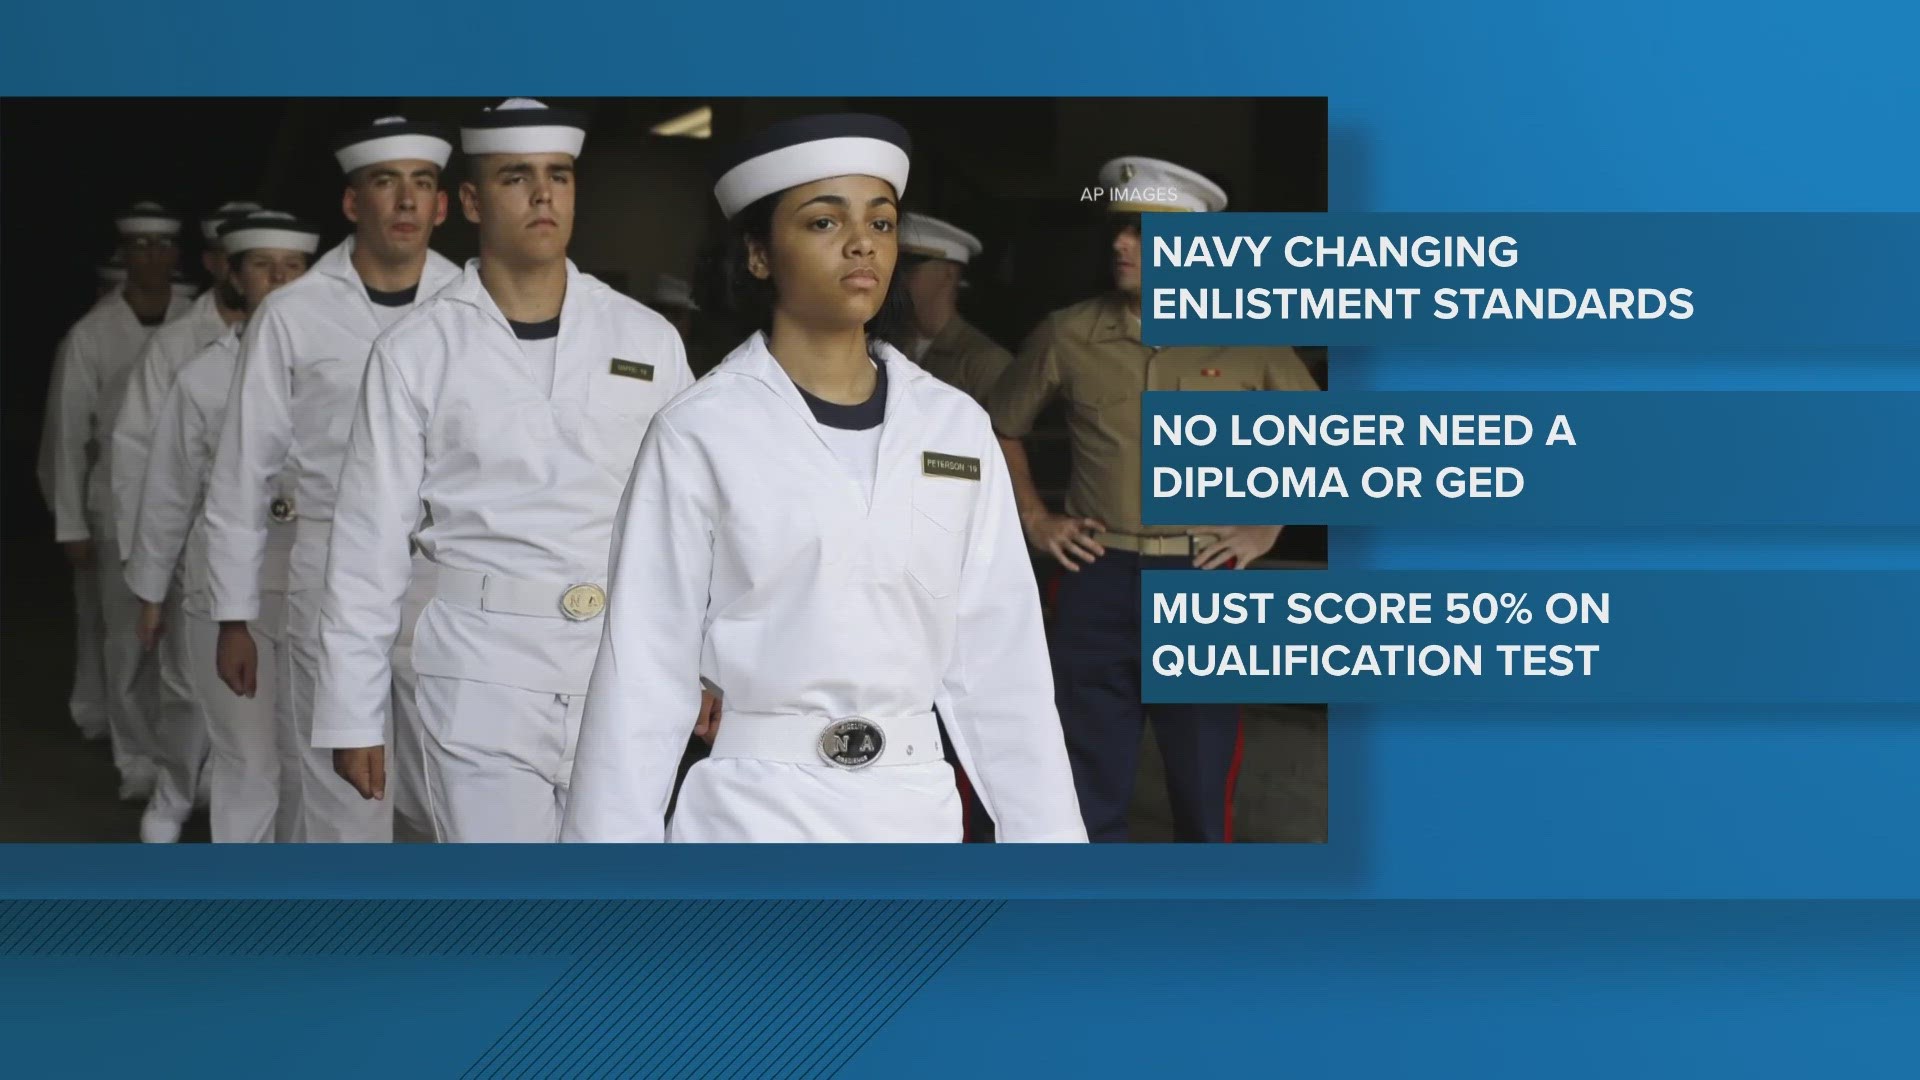 The decision follows a move in December 2022 to bring in a larger number of recruits who score very low on the Armed Services Qualification Test.